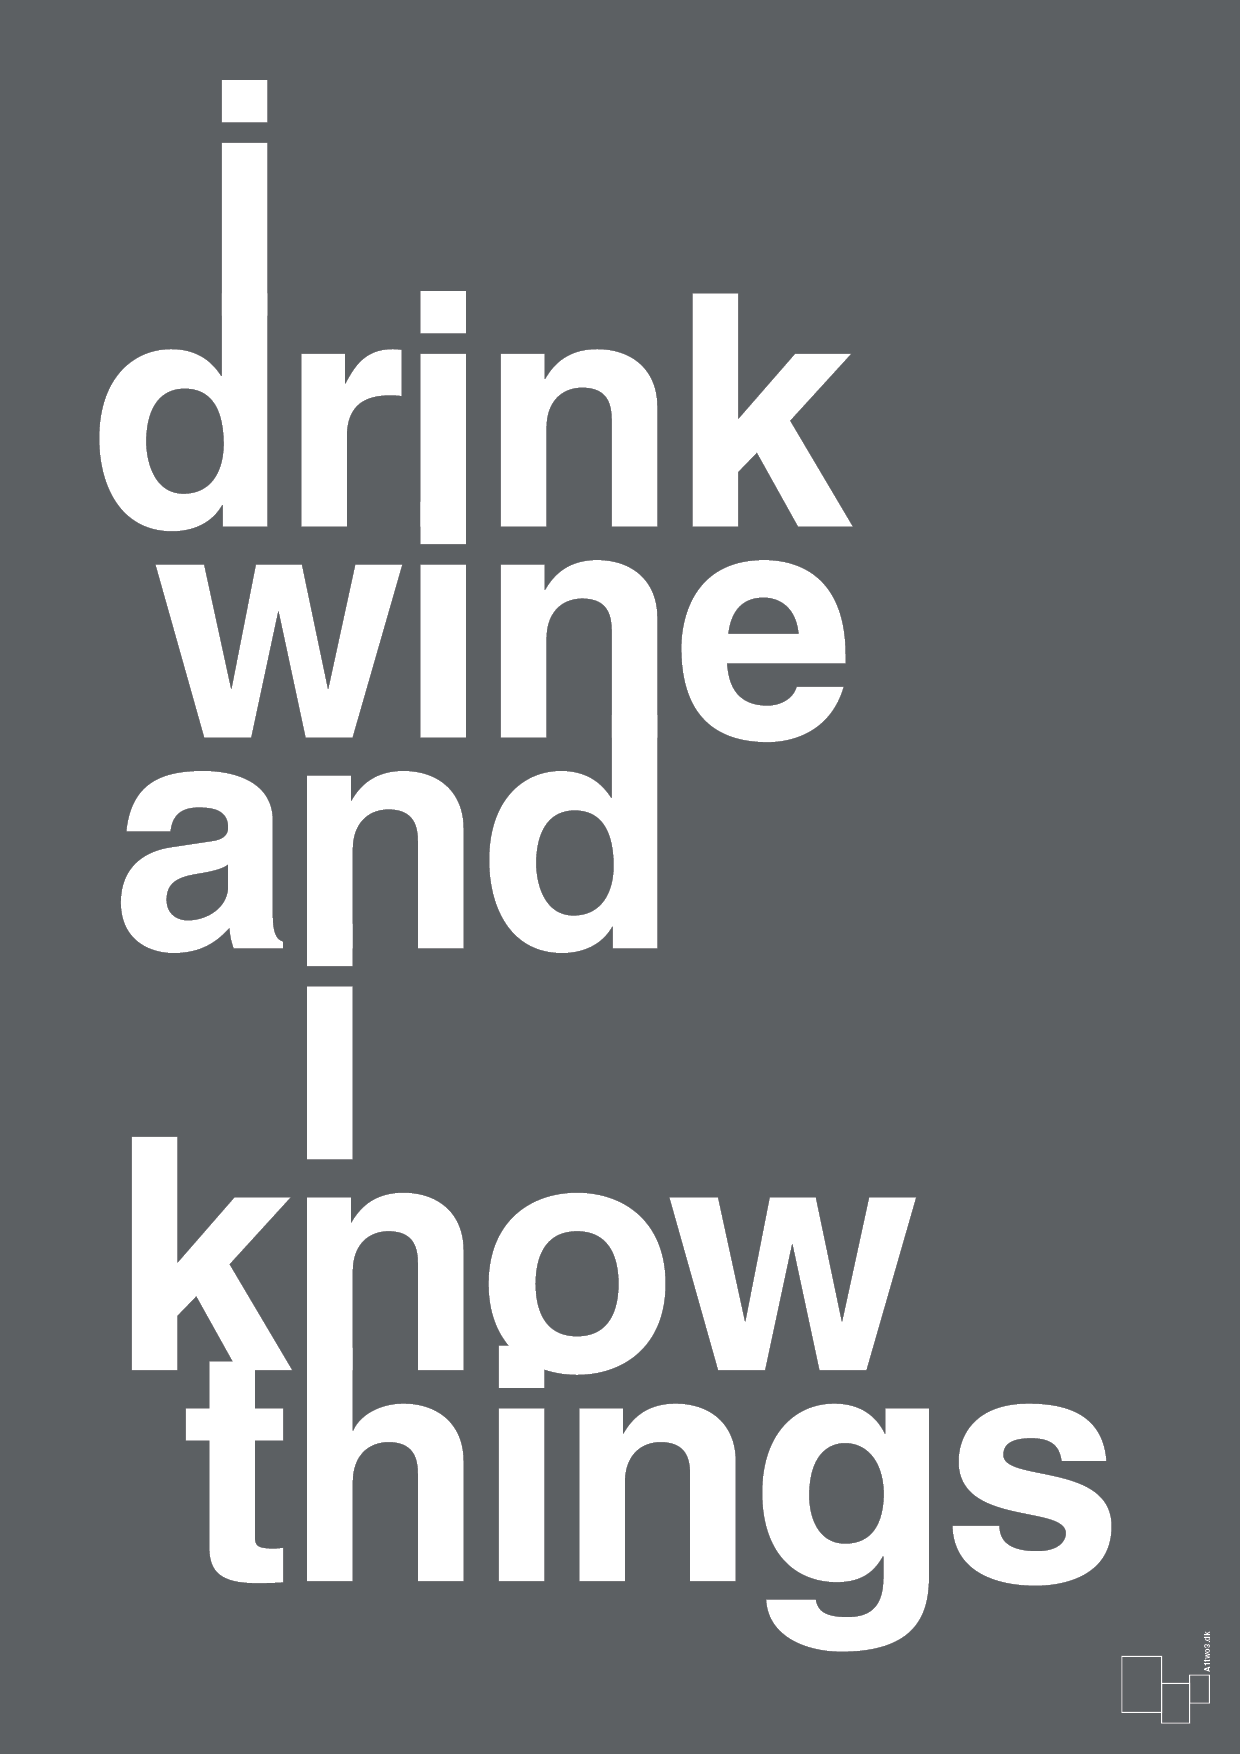 i drink wine and i know things - Plakat med Ordsprog i Graphic Charcoal